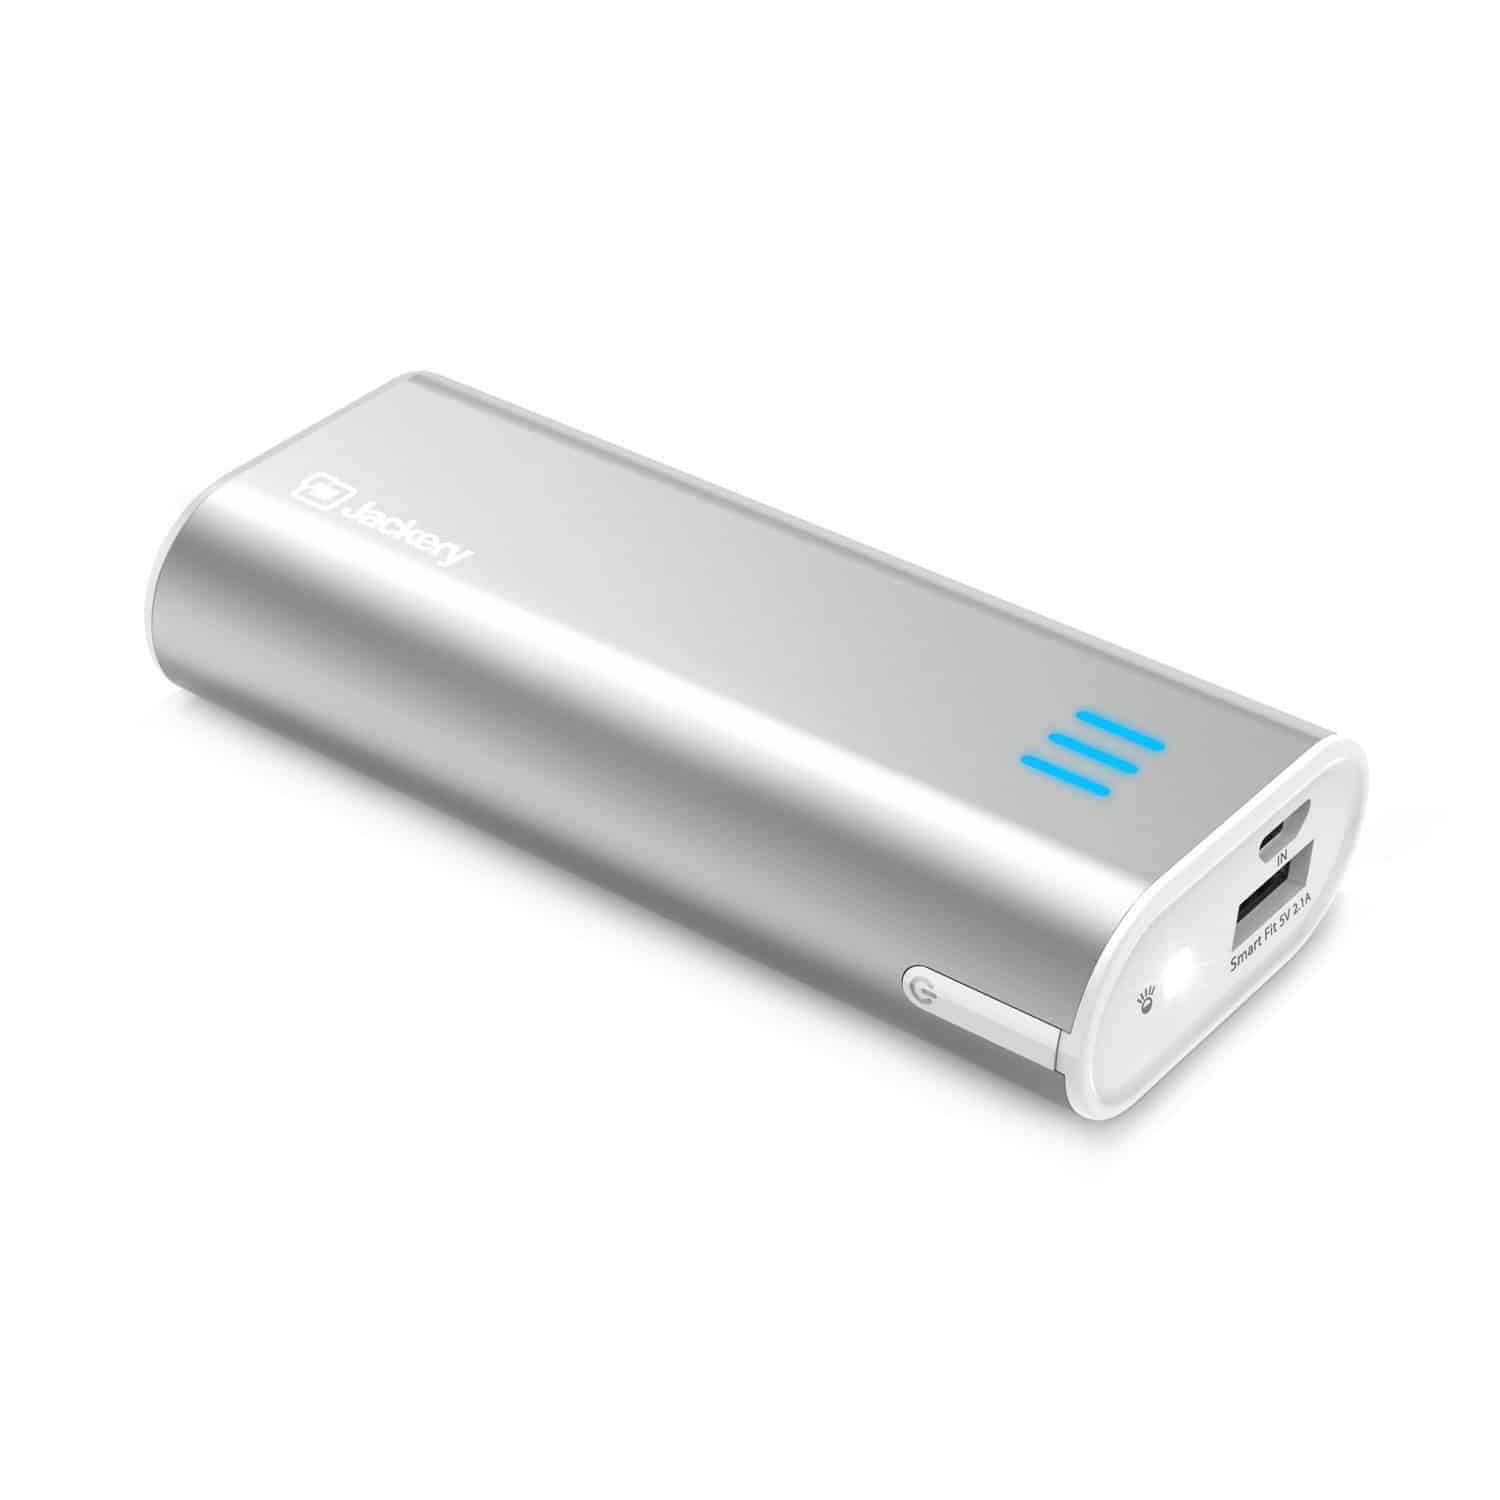 DEAL ALERT: Jackery Ultra Compact Portable Charger – 69% off!